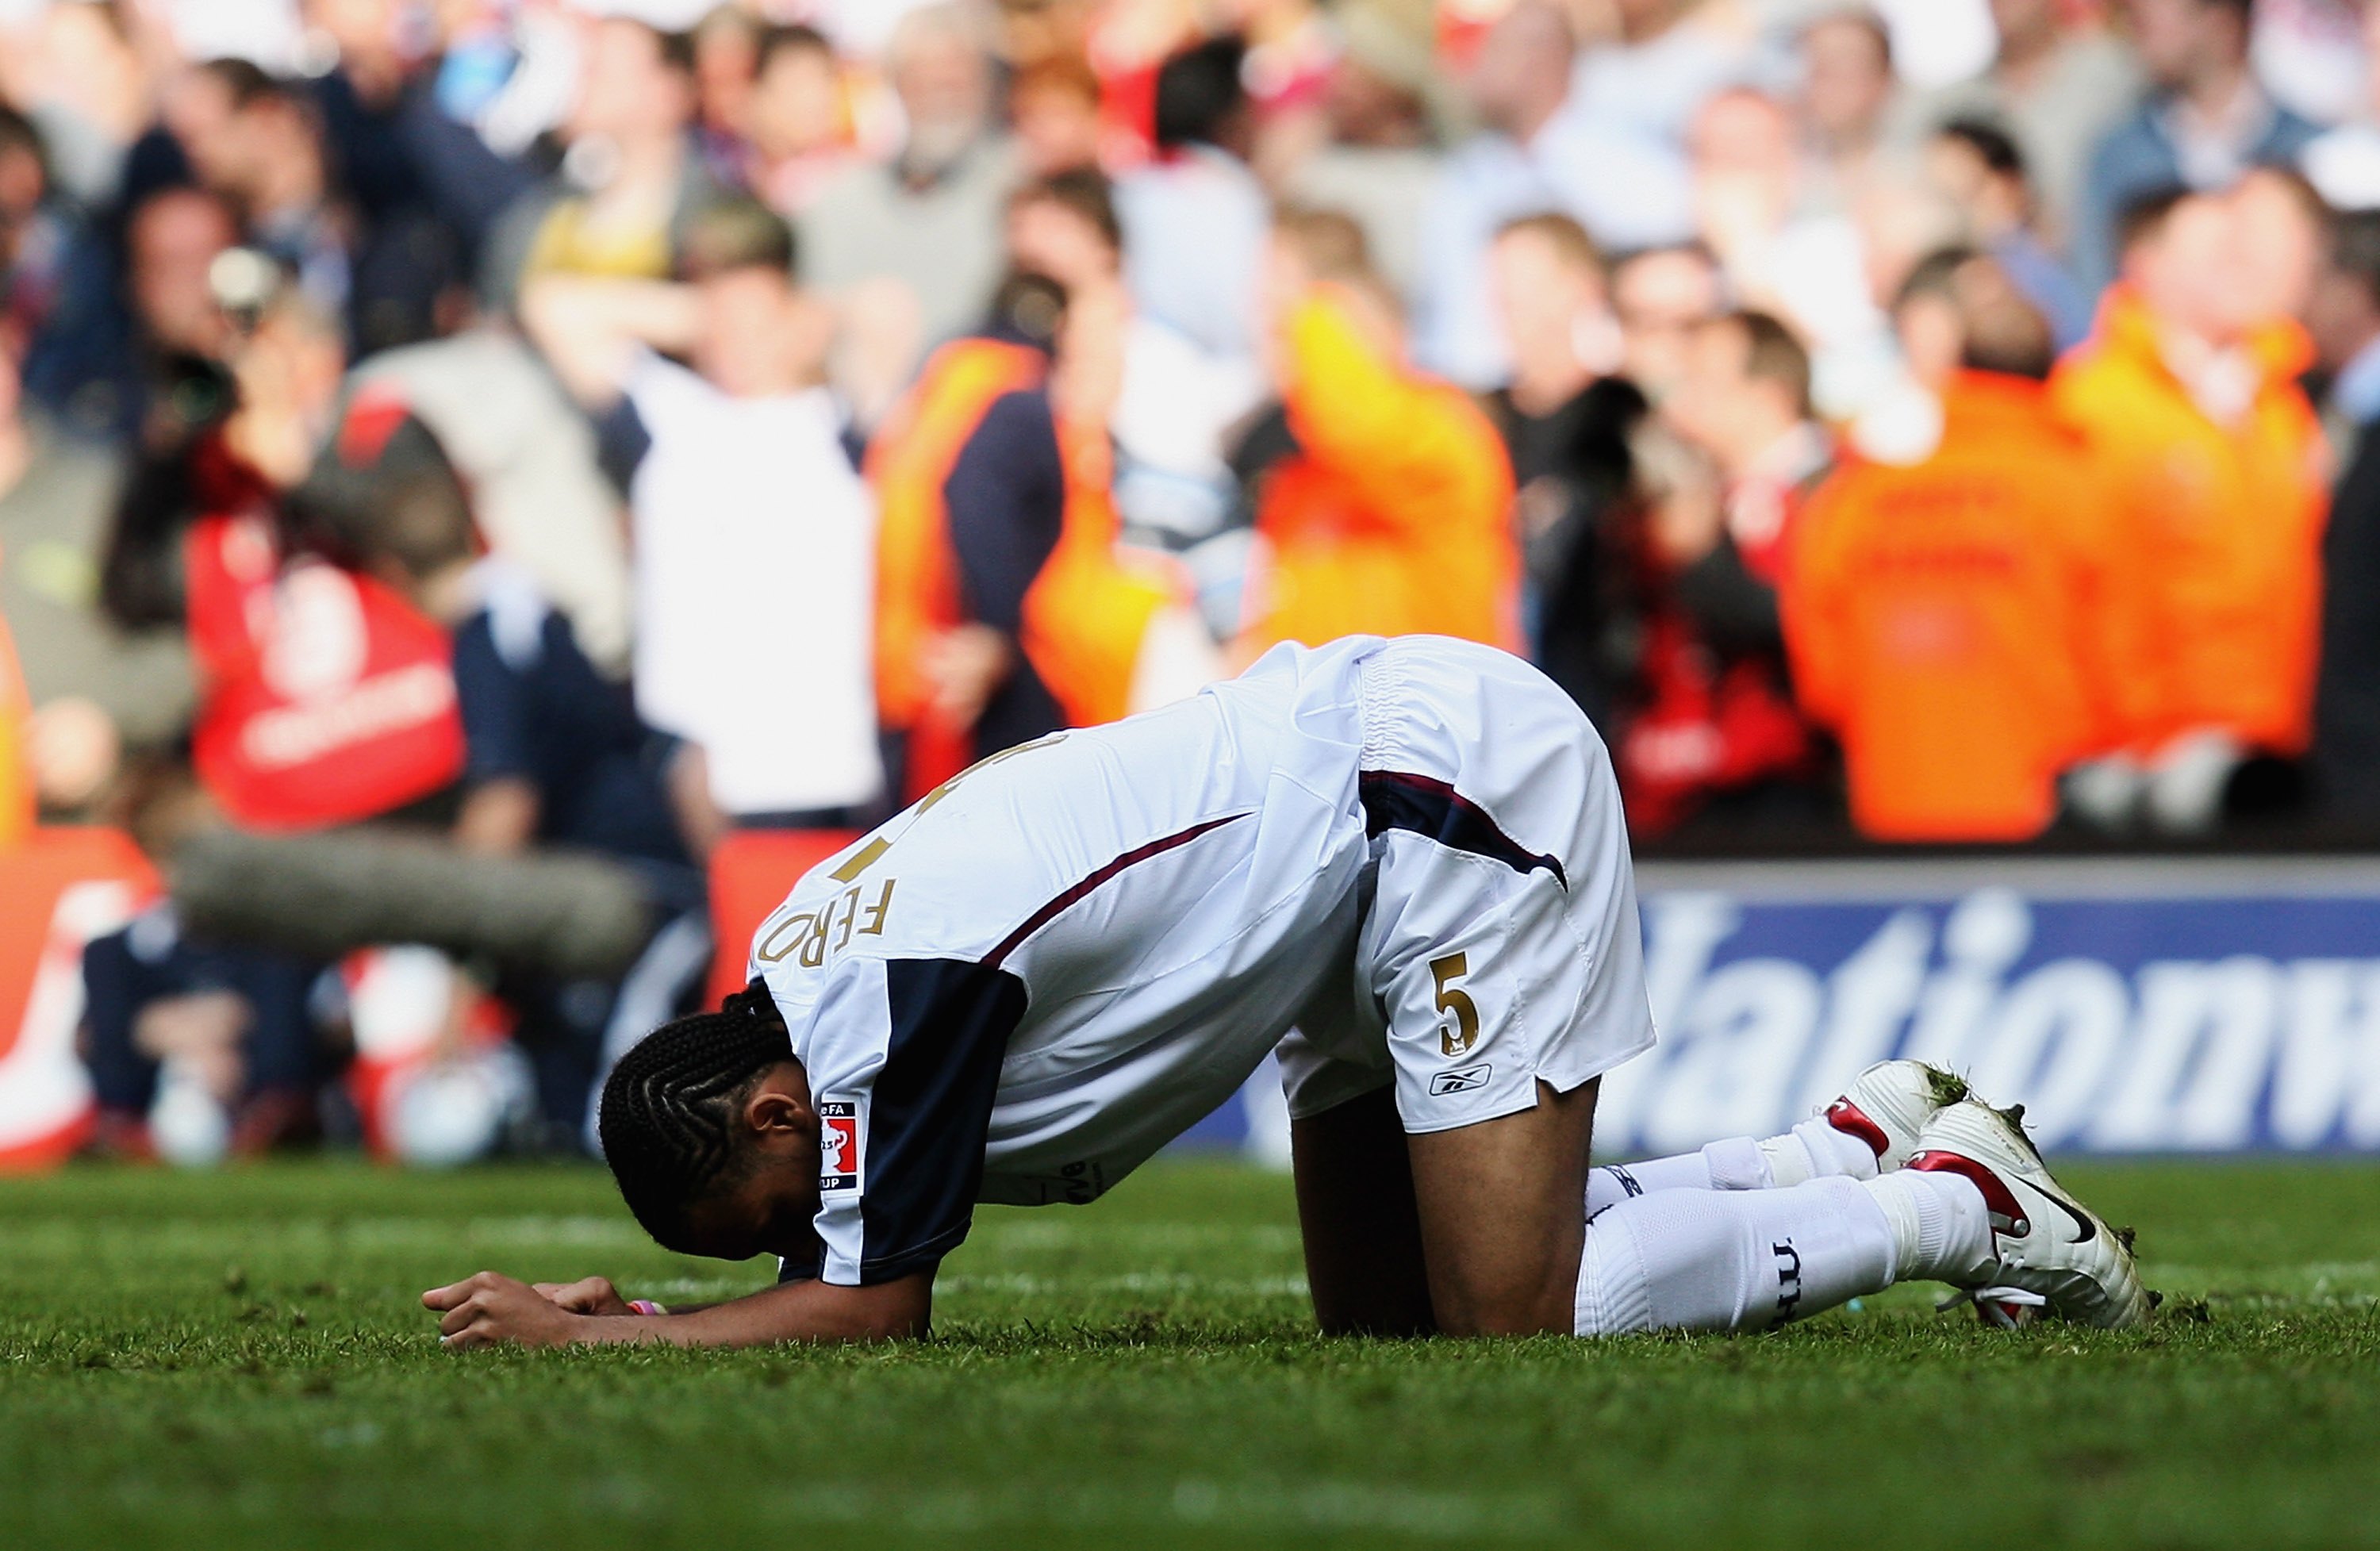 CARDIFF, UNITED KINGDOM - MAY 13:  Anton Ferdinand of West Ham United is distraught after missing his penalty during the shoot out at the end of the FA Cup Final match between Liverpool and West Ham United at the Millennium Stadium on May 13, 2006 in Card